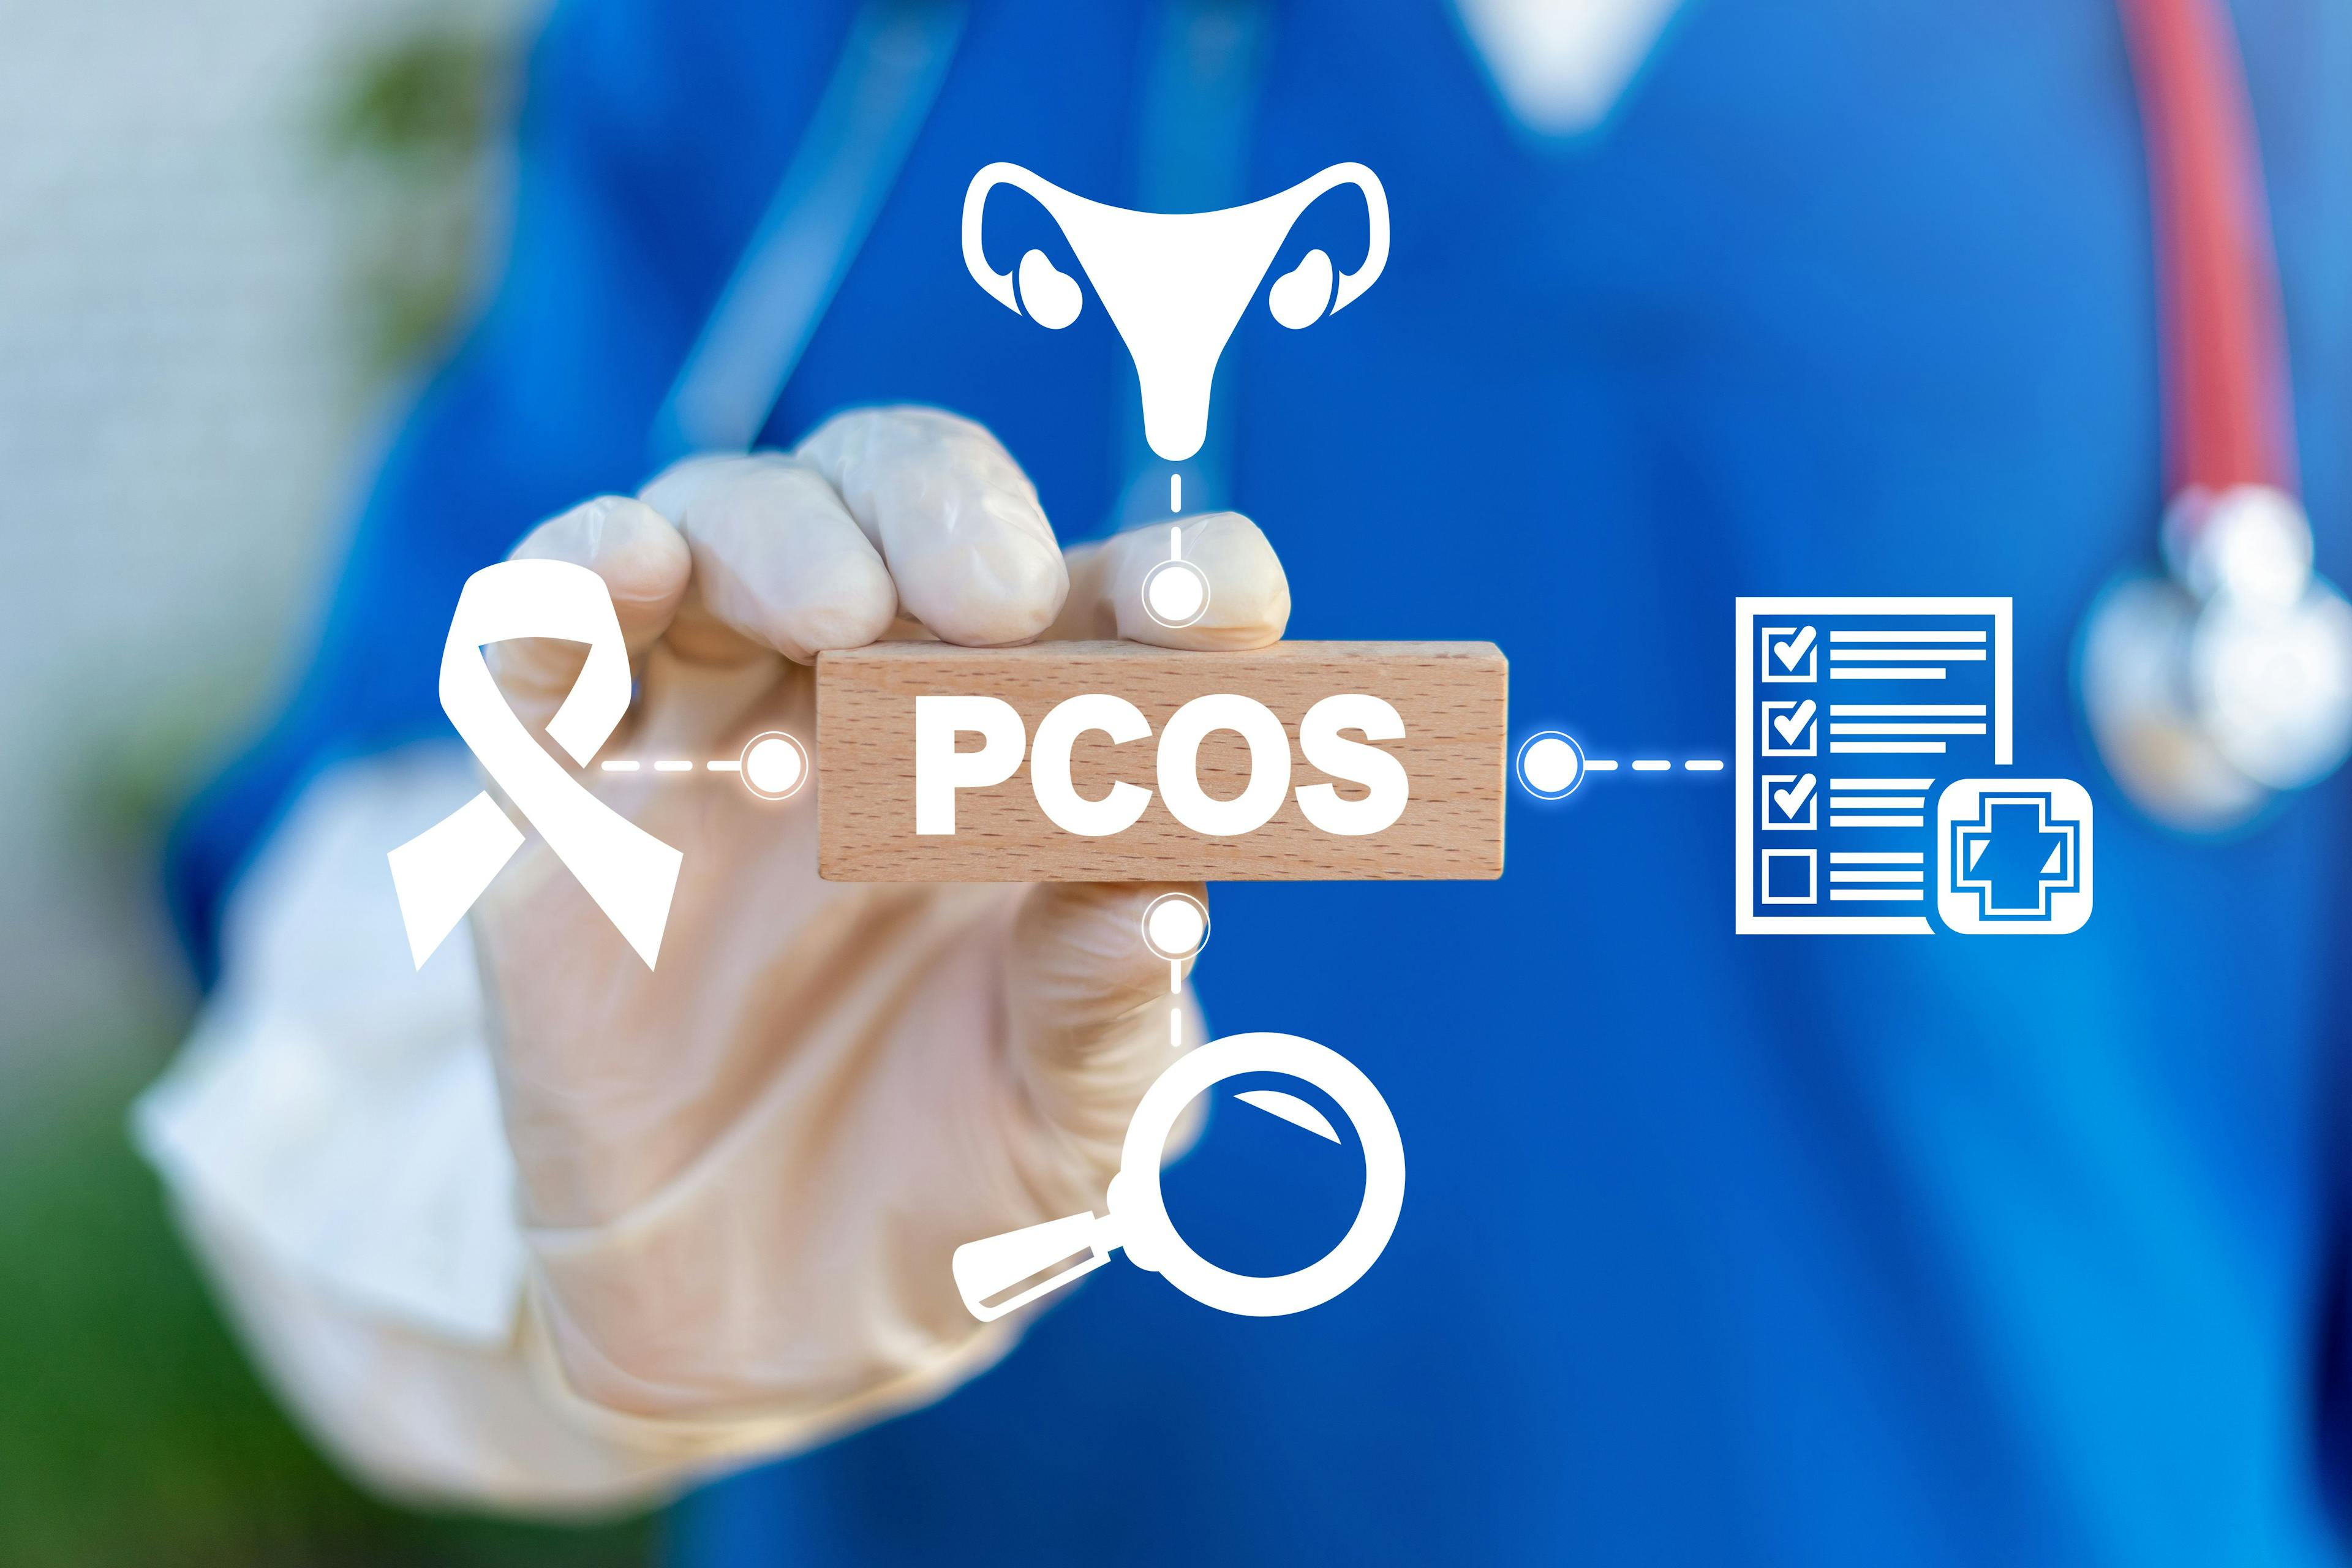 Factors that may lead women with PCOS to develop type 2 diabetes